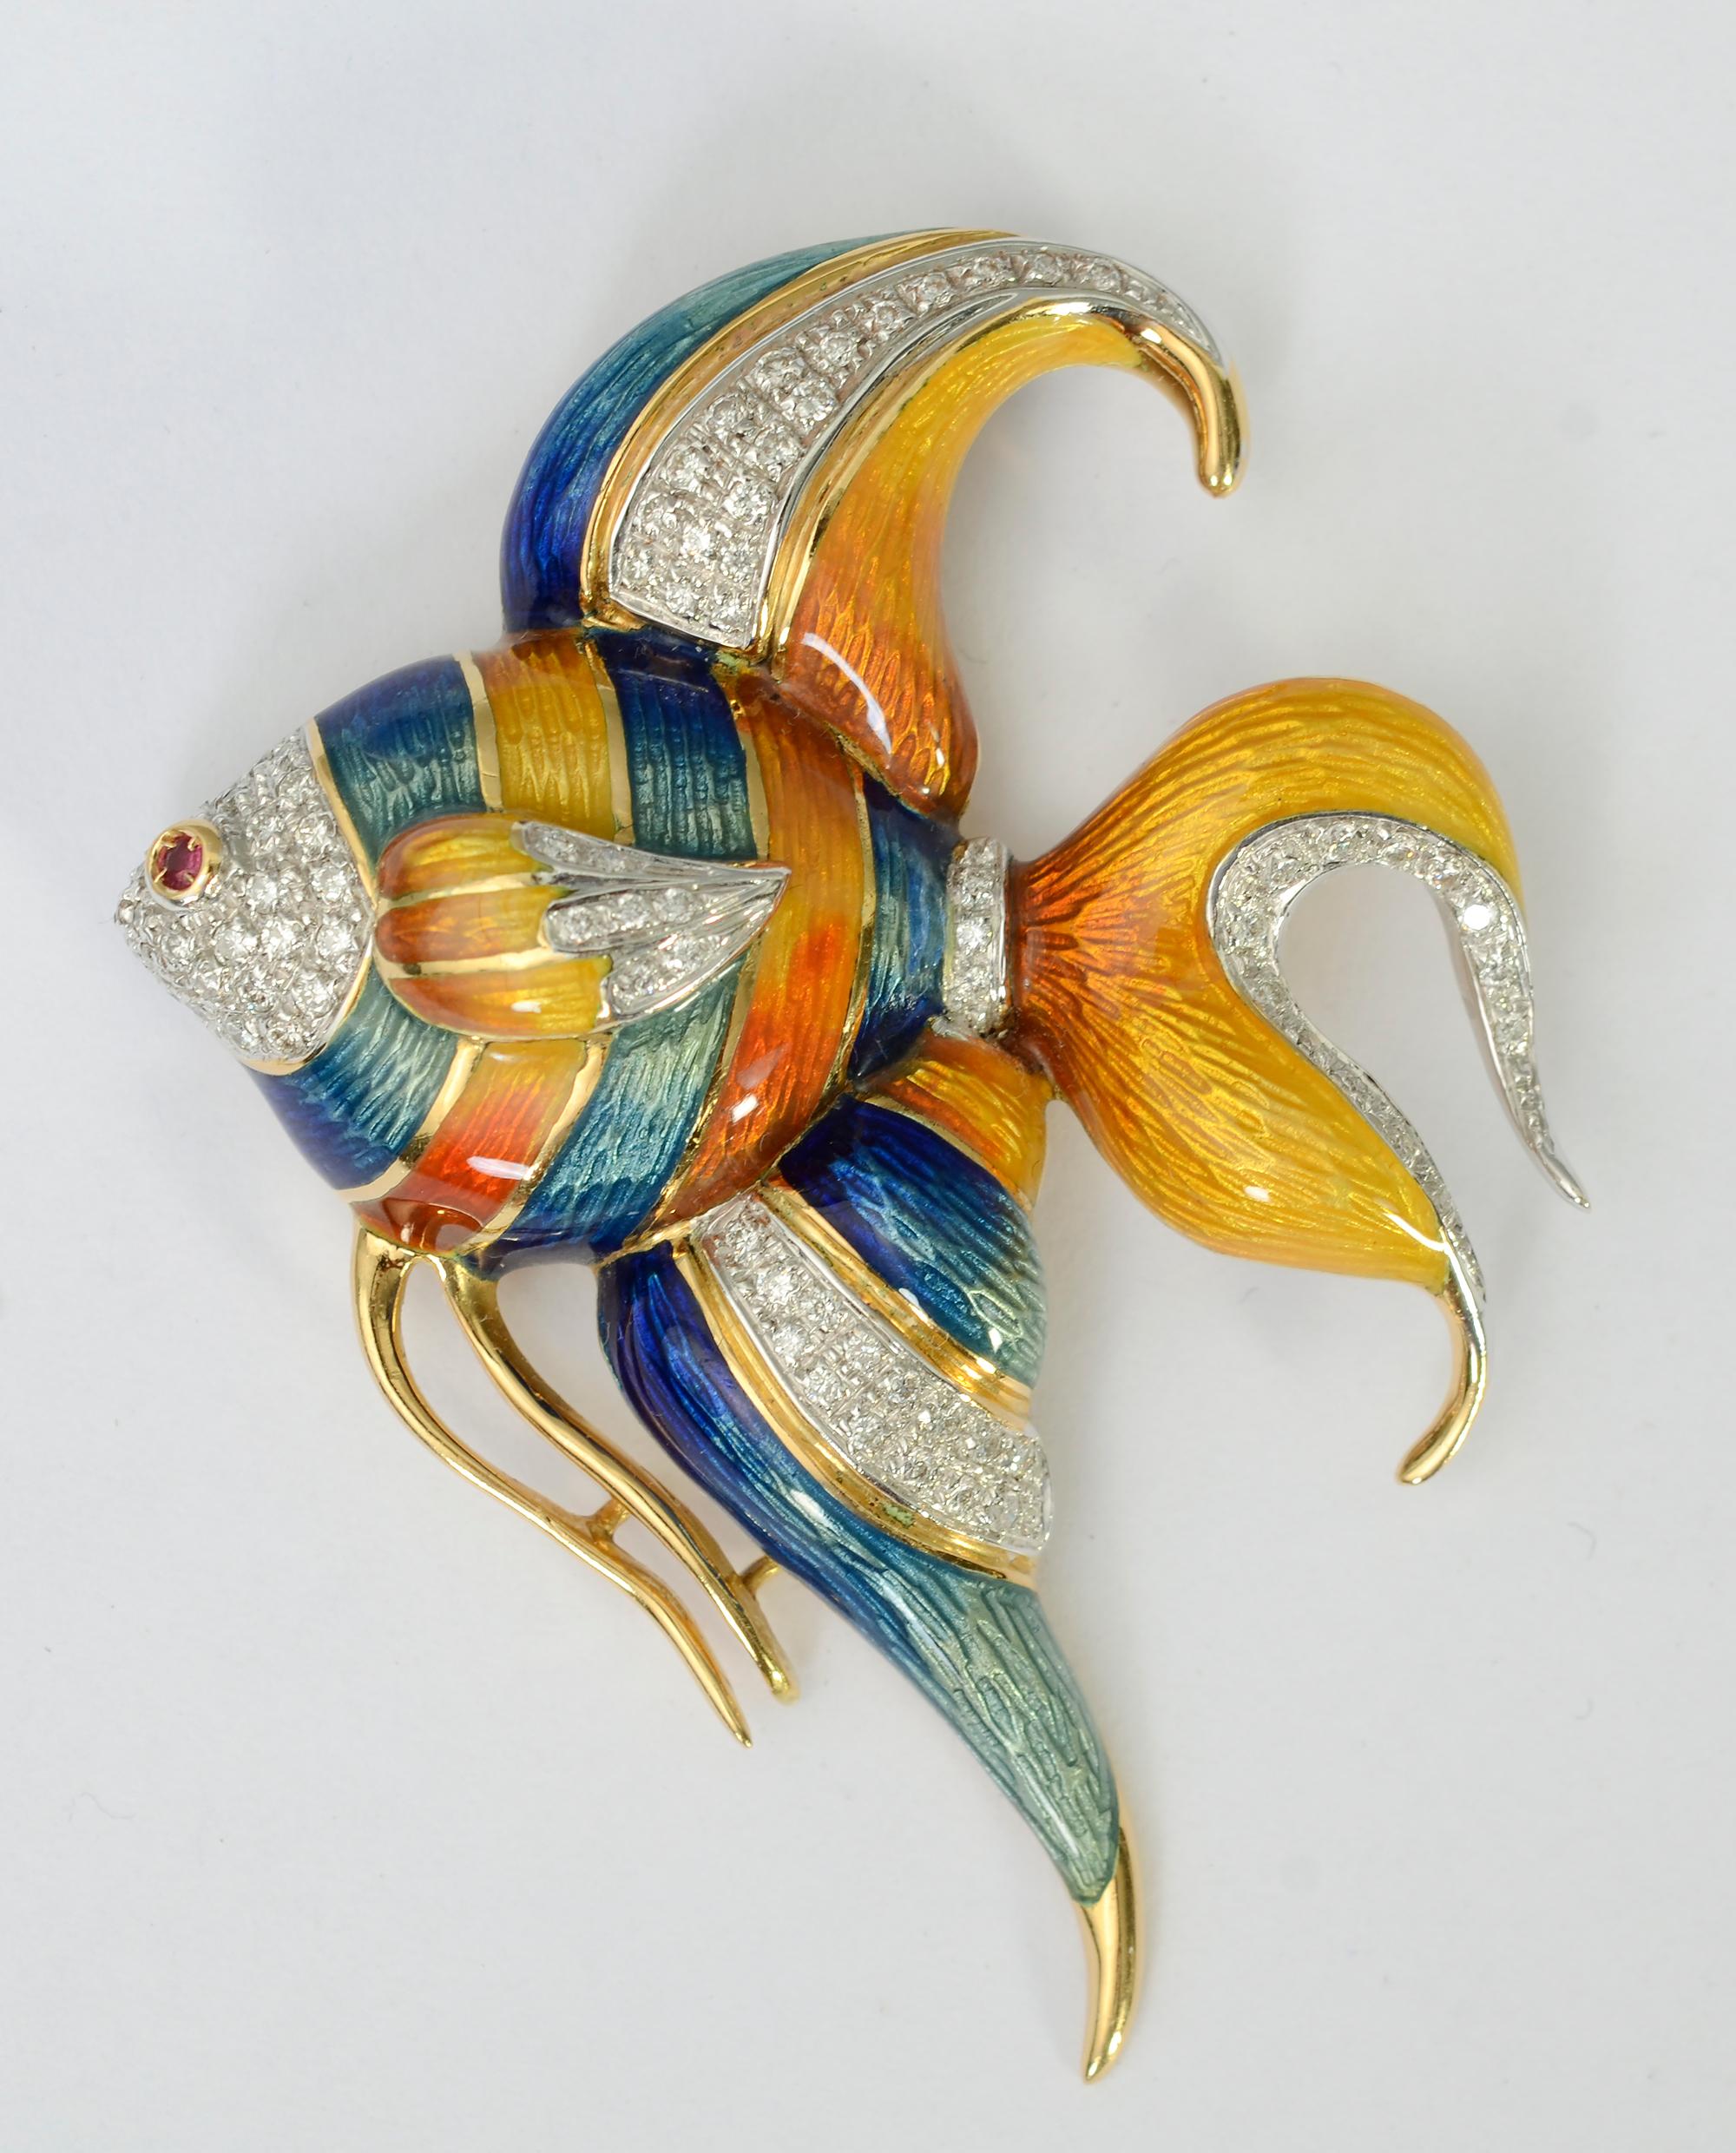 Finely made Angelfish with an  enamel and diamond body and ruby eye. The fish is both a pendant and a brooch, There is wonderful shading to the guilloche enamel. Measurements are 2 inches wide and 2 1/2 inches long.